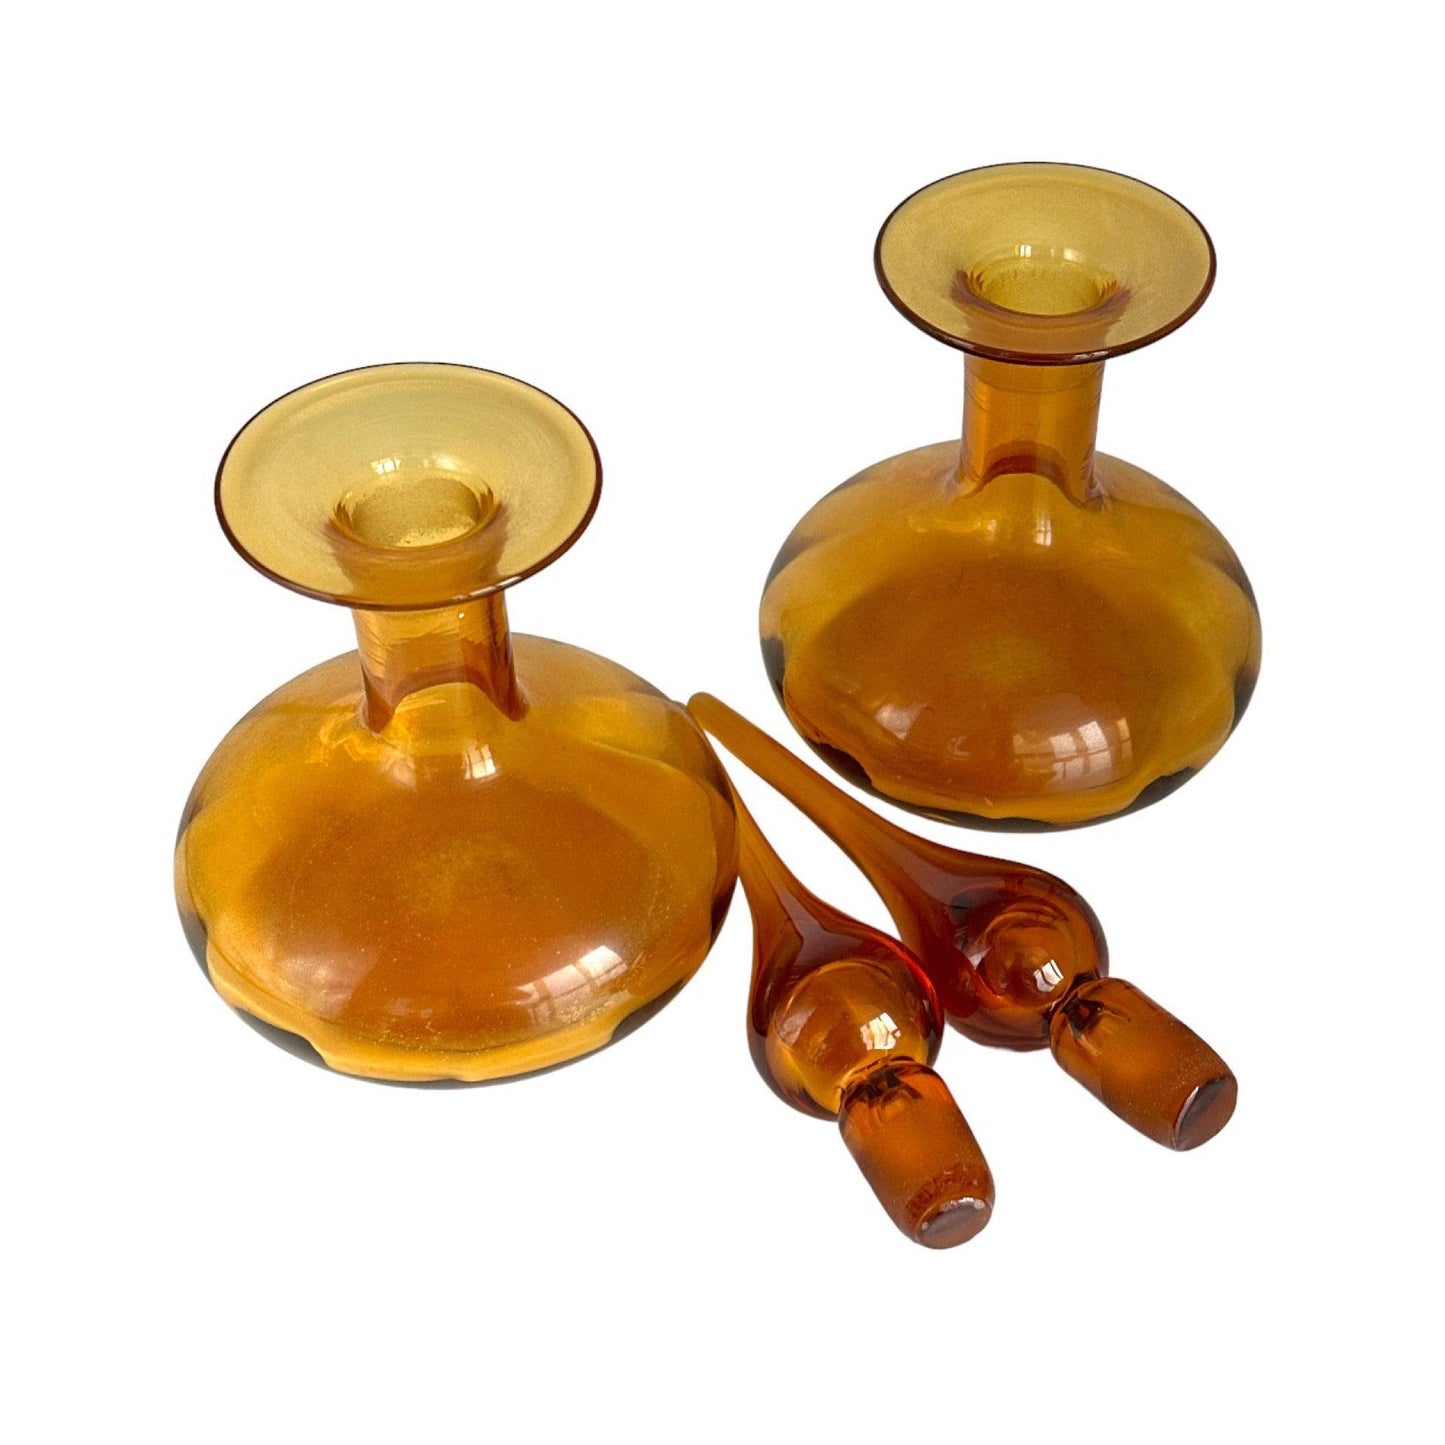 Vintage Amber Glass Decanters: Hand-Blown Bareware Collectible